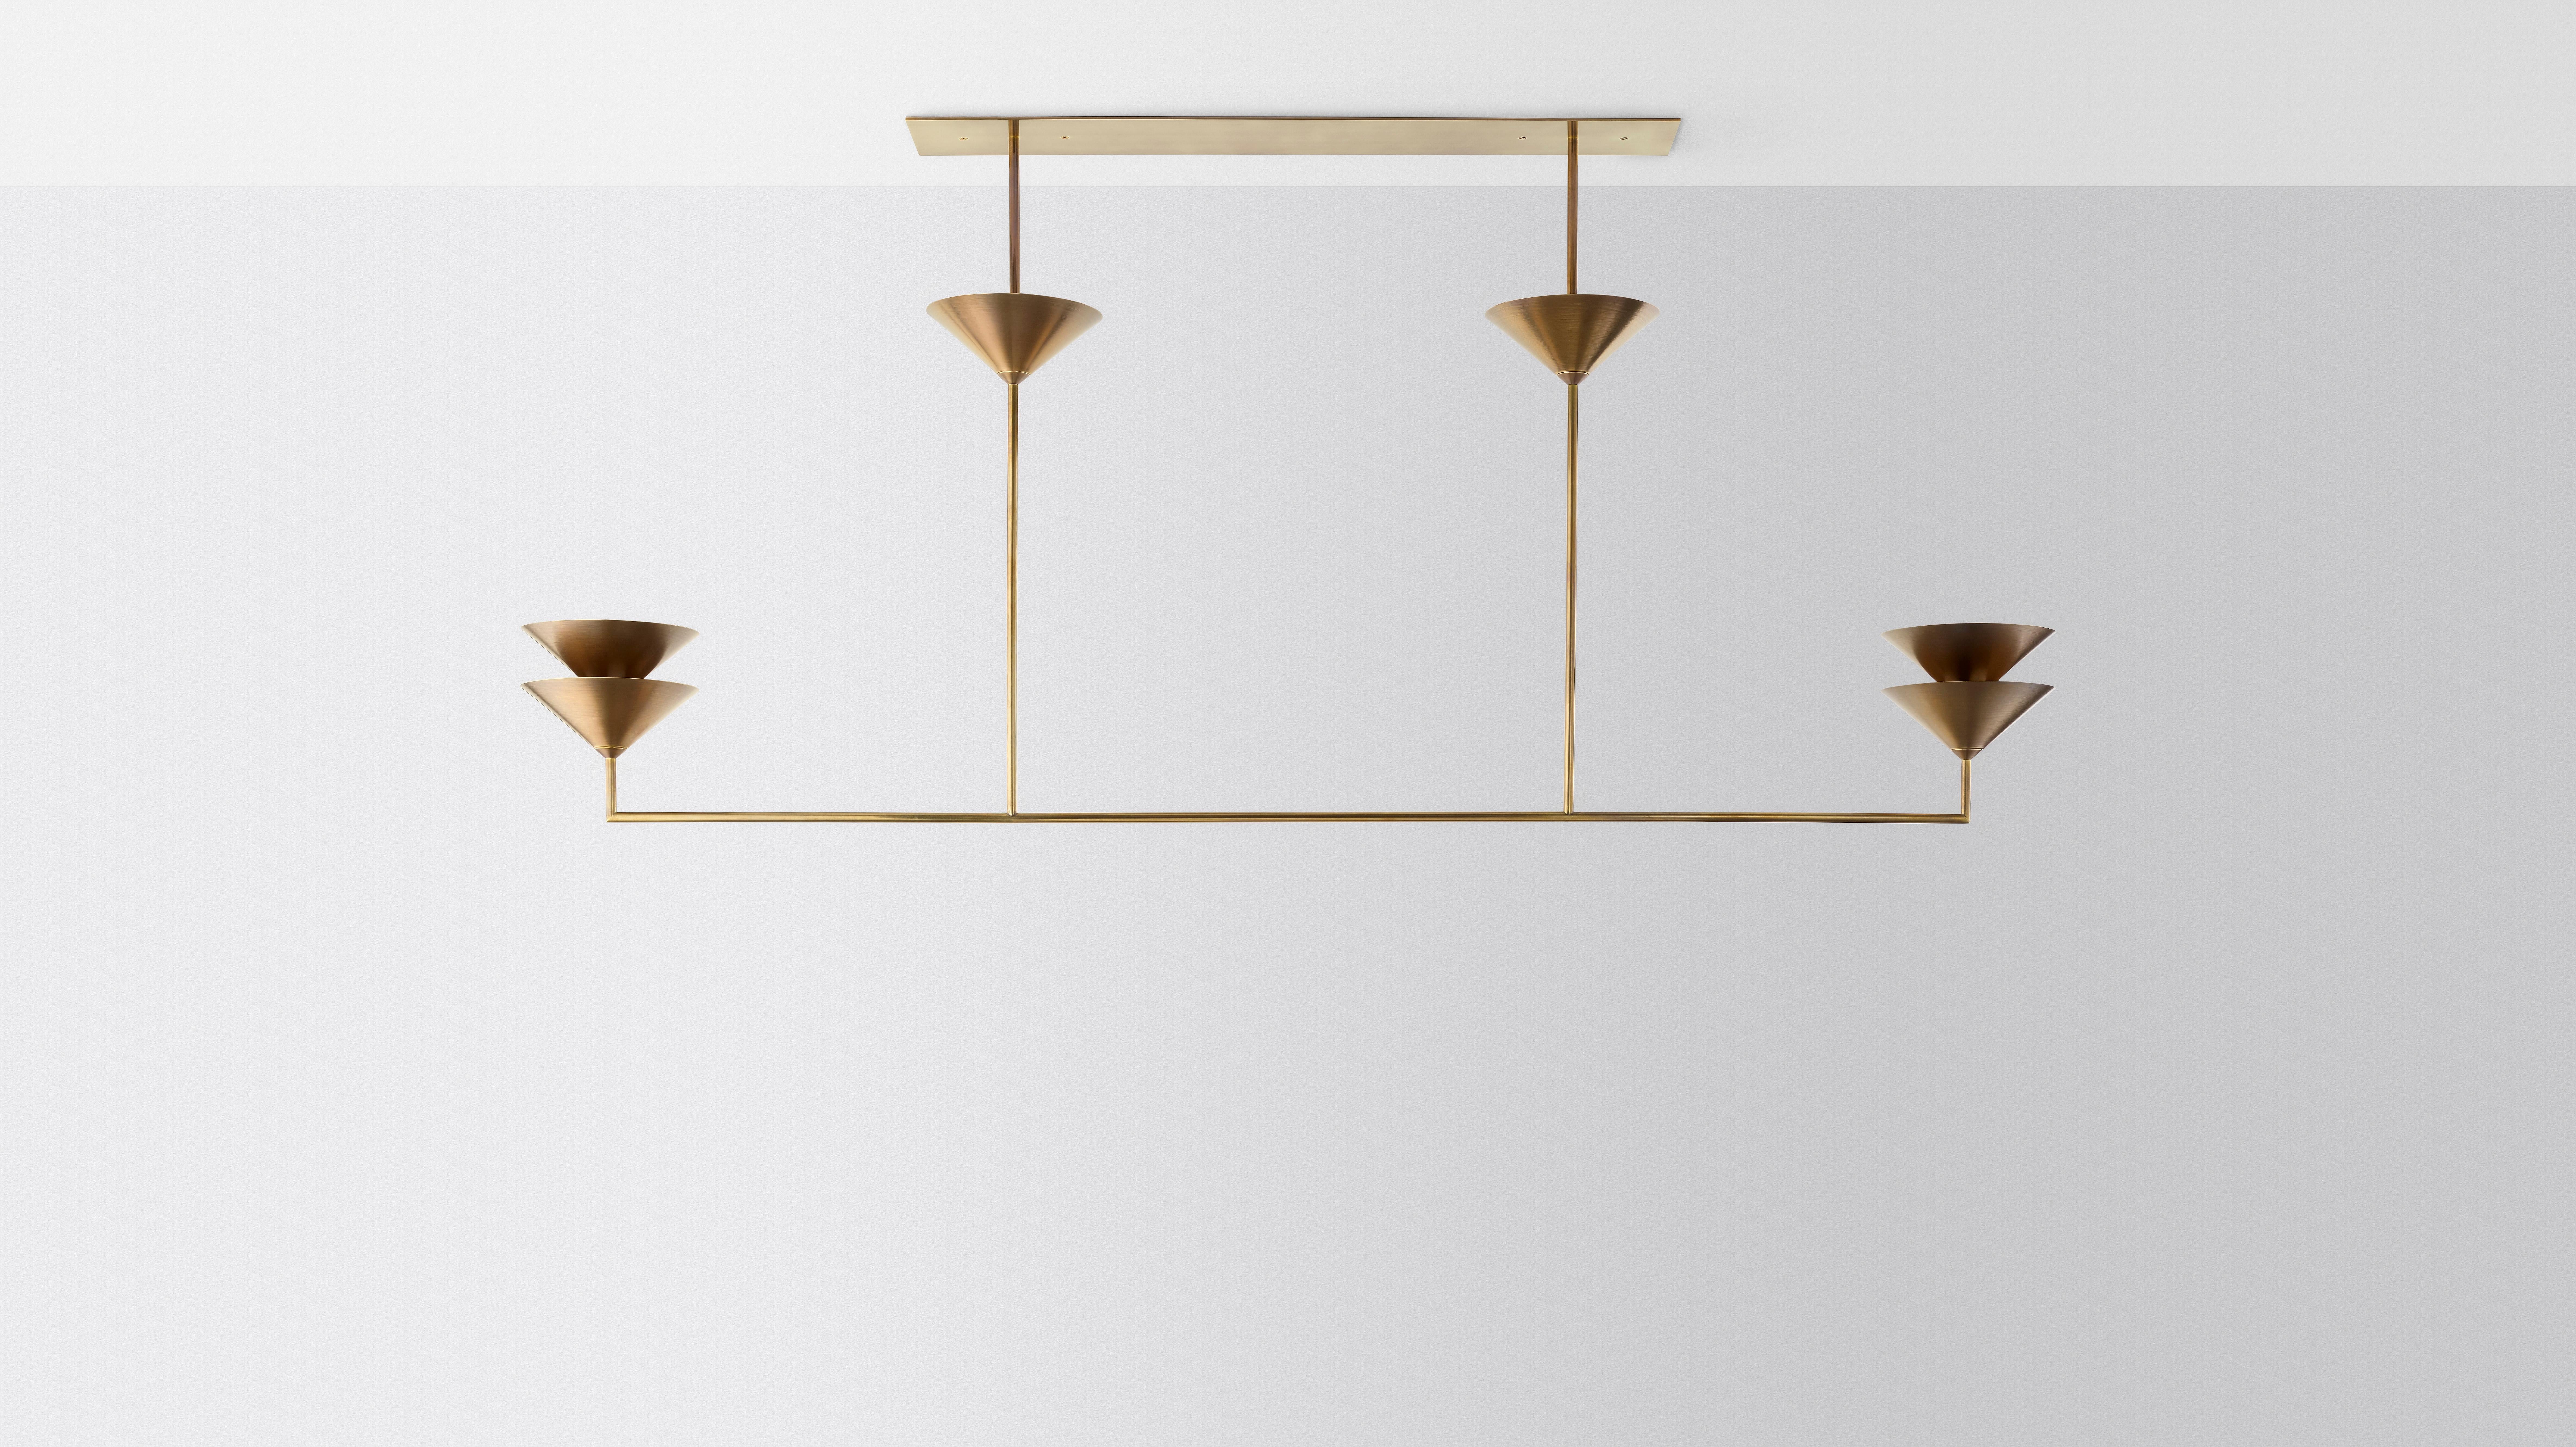 Balanced stack by Volker Haug
Pyramid Scheme series
Dimensions: W 182, D 21, H 70 cm
Support: 90 cm 
Suspension: minimum 70 cm
Material: Brass
Finishes: Polished, Brushed or Bronzed Brass; Enamel or Chrome
Plated. Custom finishes available on